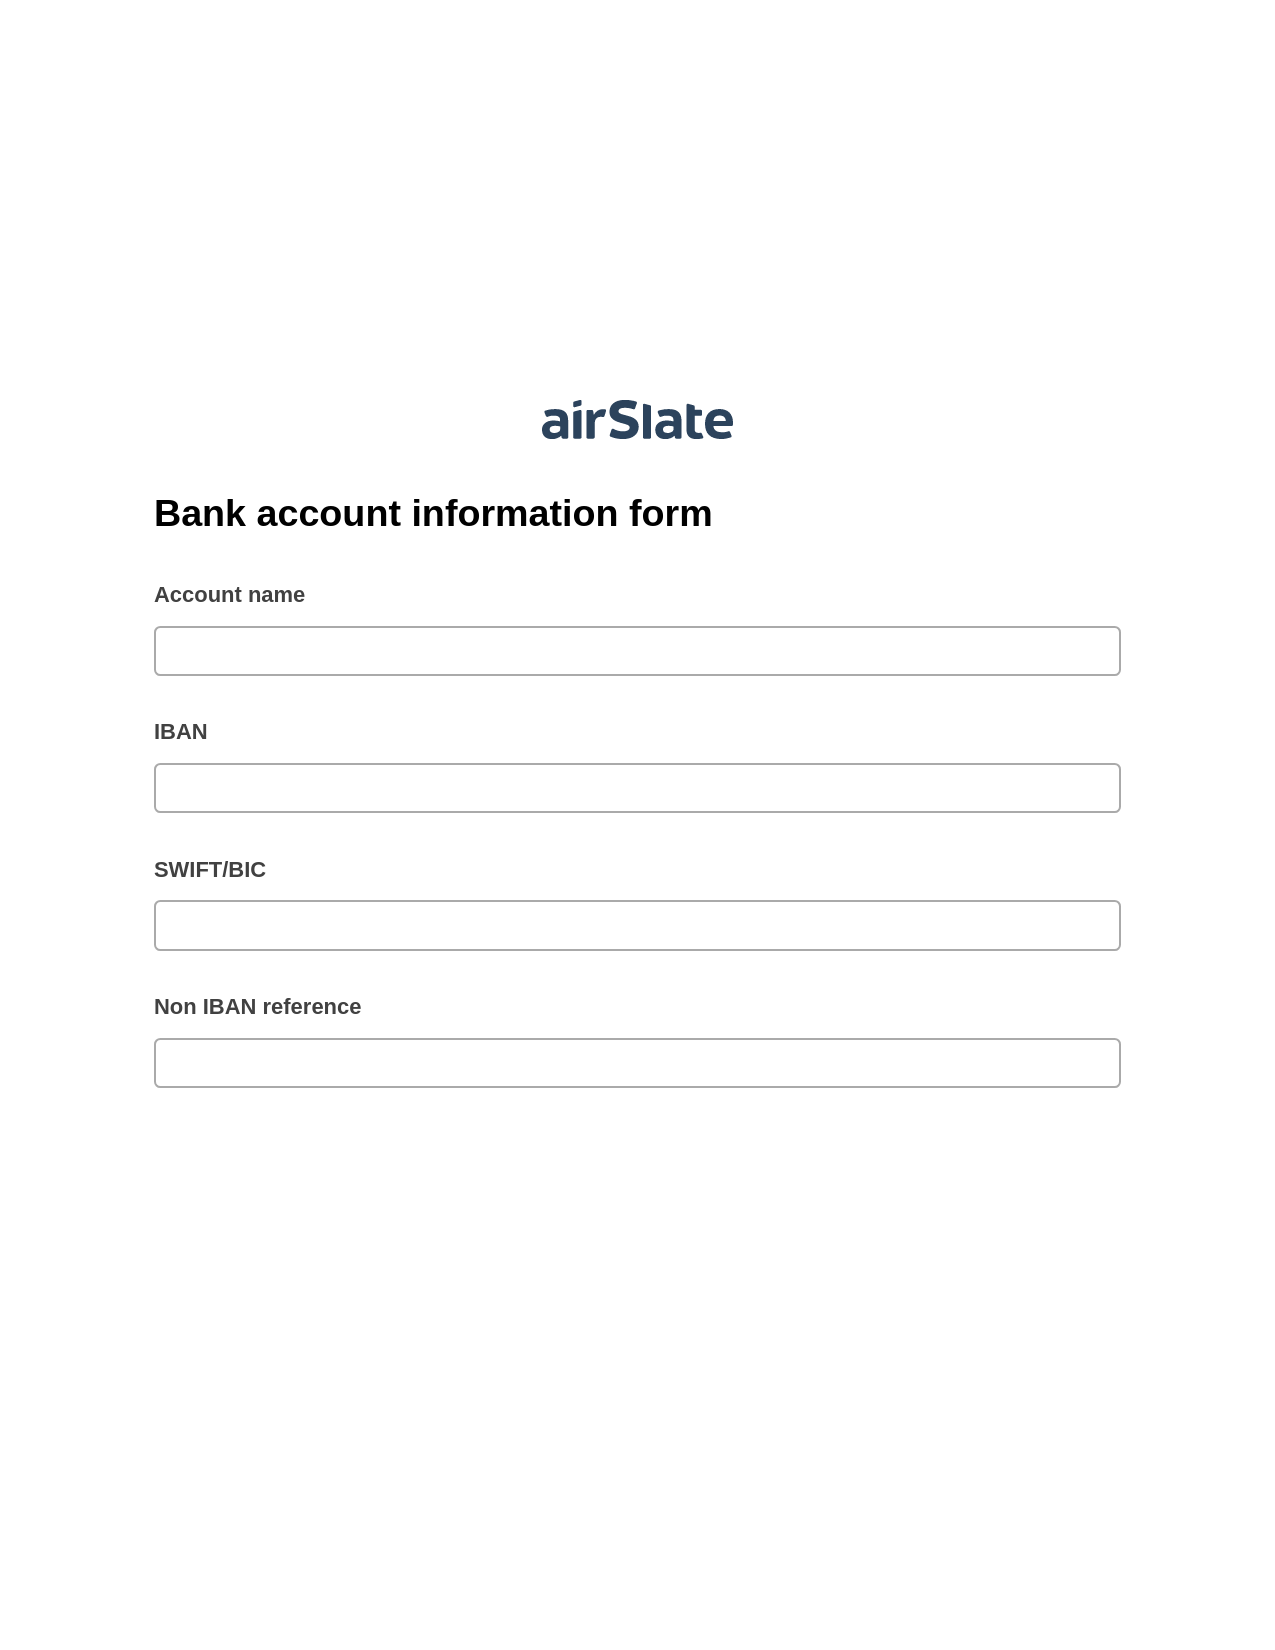 Multirole Bank account information form Pre-fill from CSV File Dropdown Options Bot, Create Salesforce Record Bot, Export to MySQL Bot